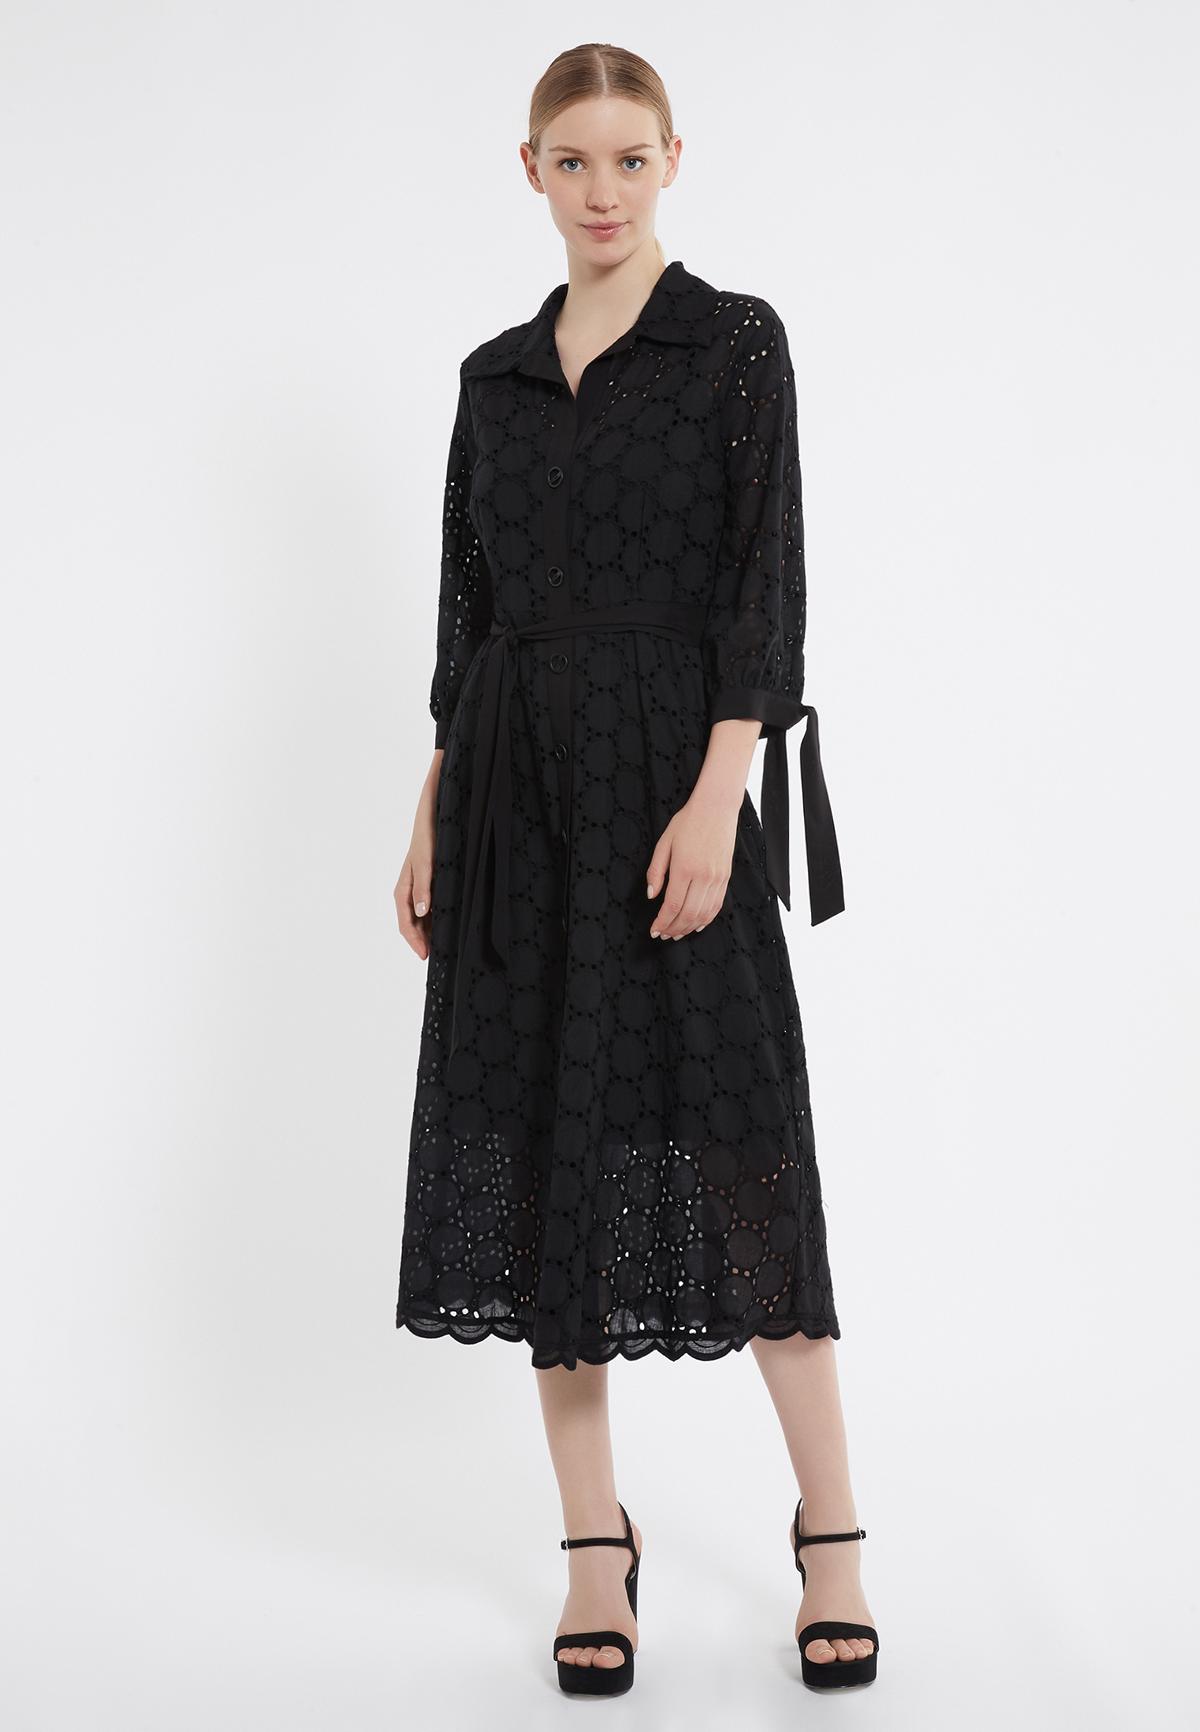 Blouse dress Zekos with belt and collar from black lace | Ana Alcazar